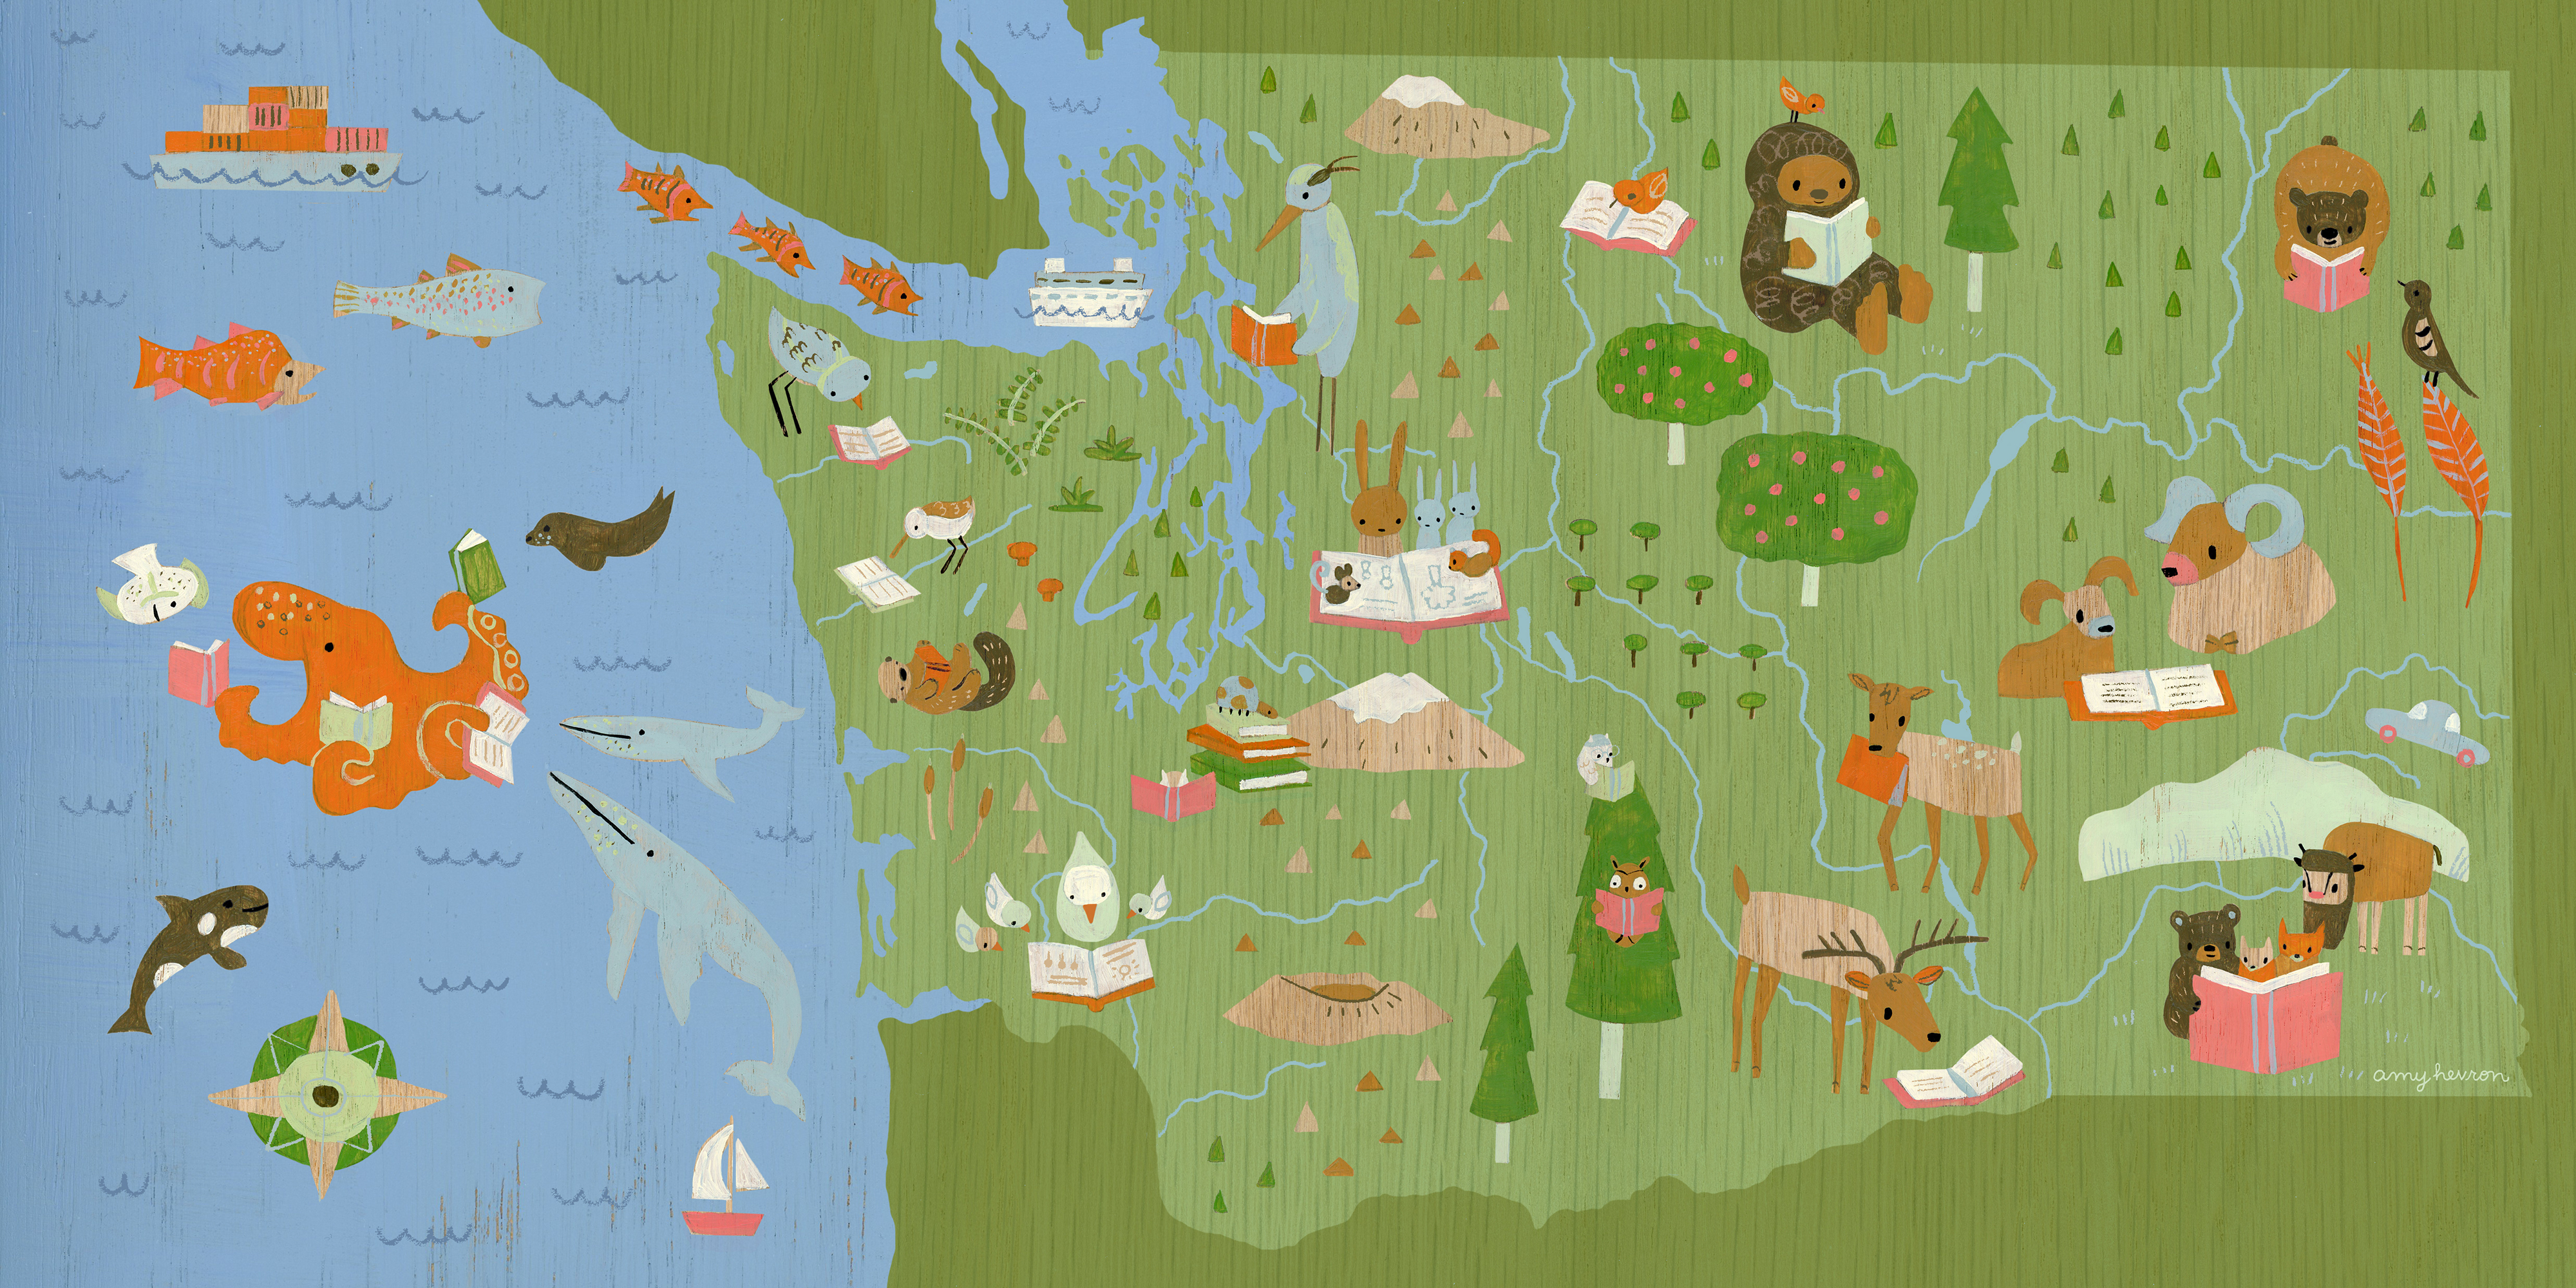 A colorful map of Washington state showing animals reading books.